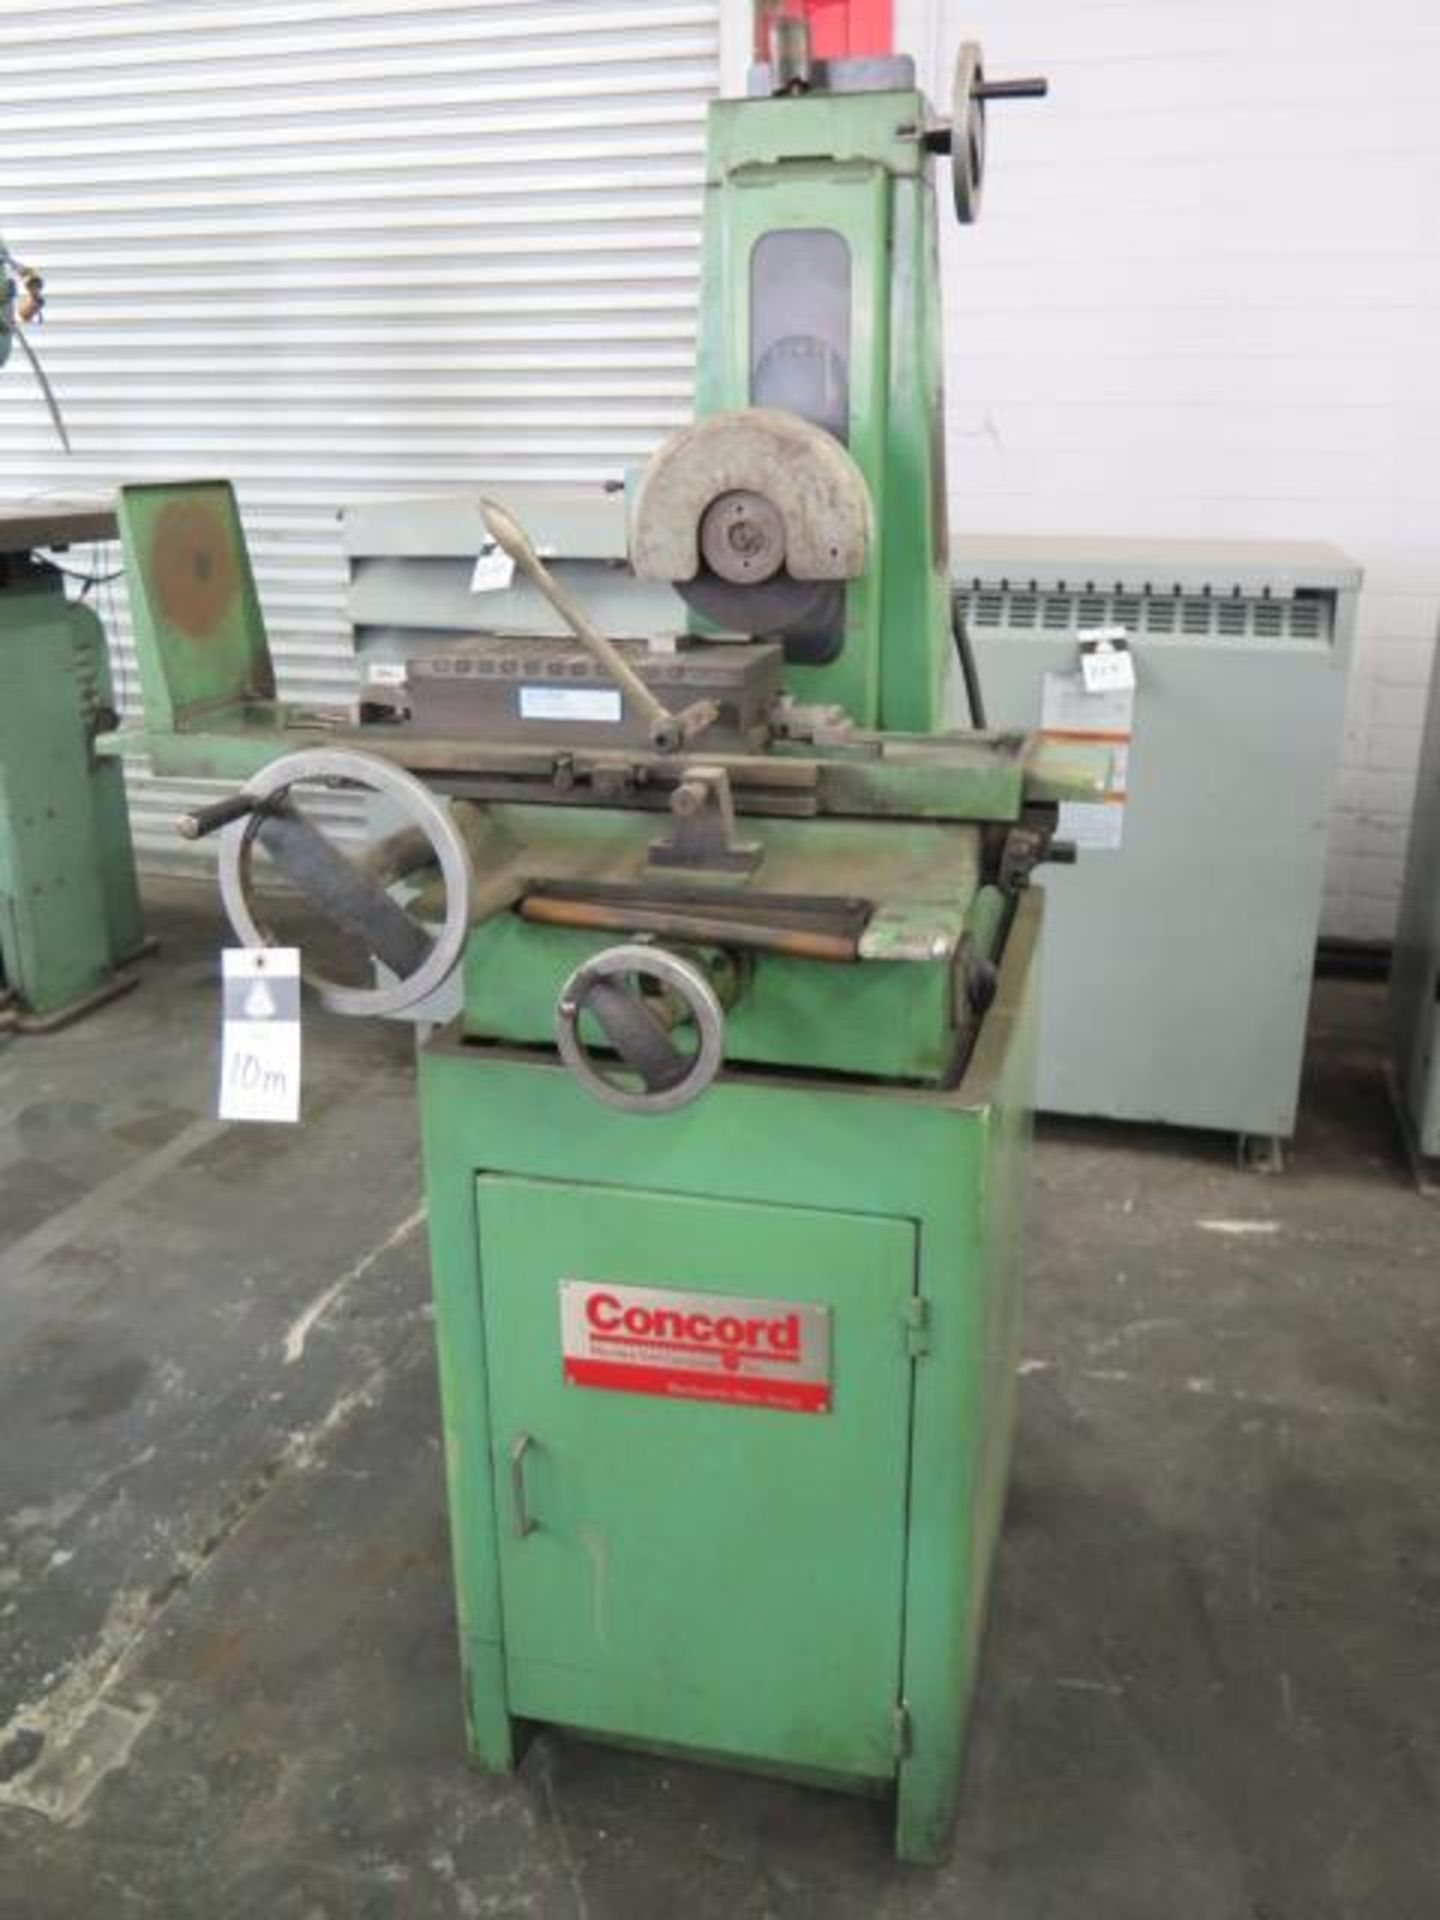 Concord 6" x 12" Surface Grinder w/ Yuasa Magnetic Chuck (SOLD AS-IS - NO WARRANTY) - Image 2 of 6